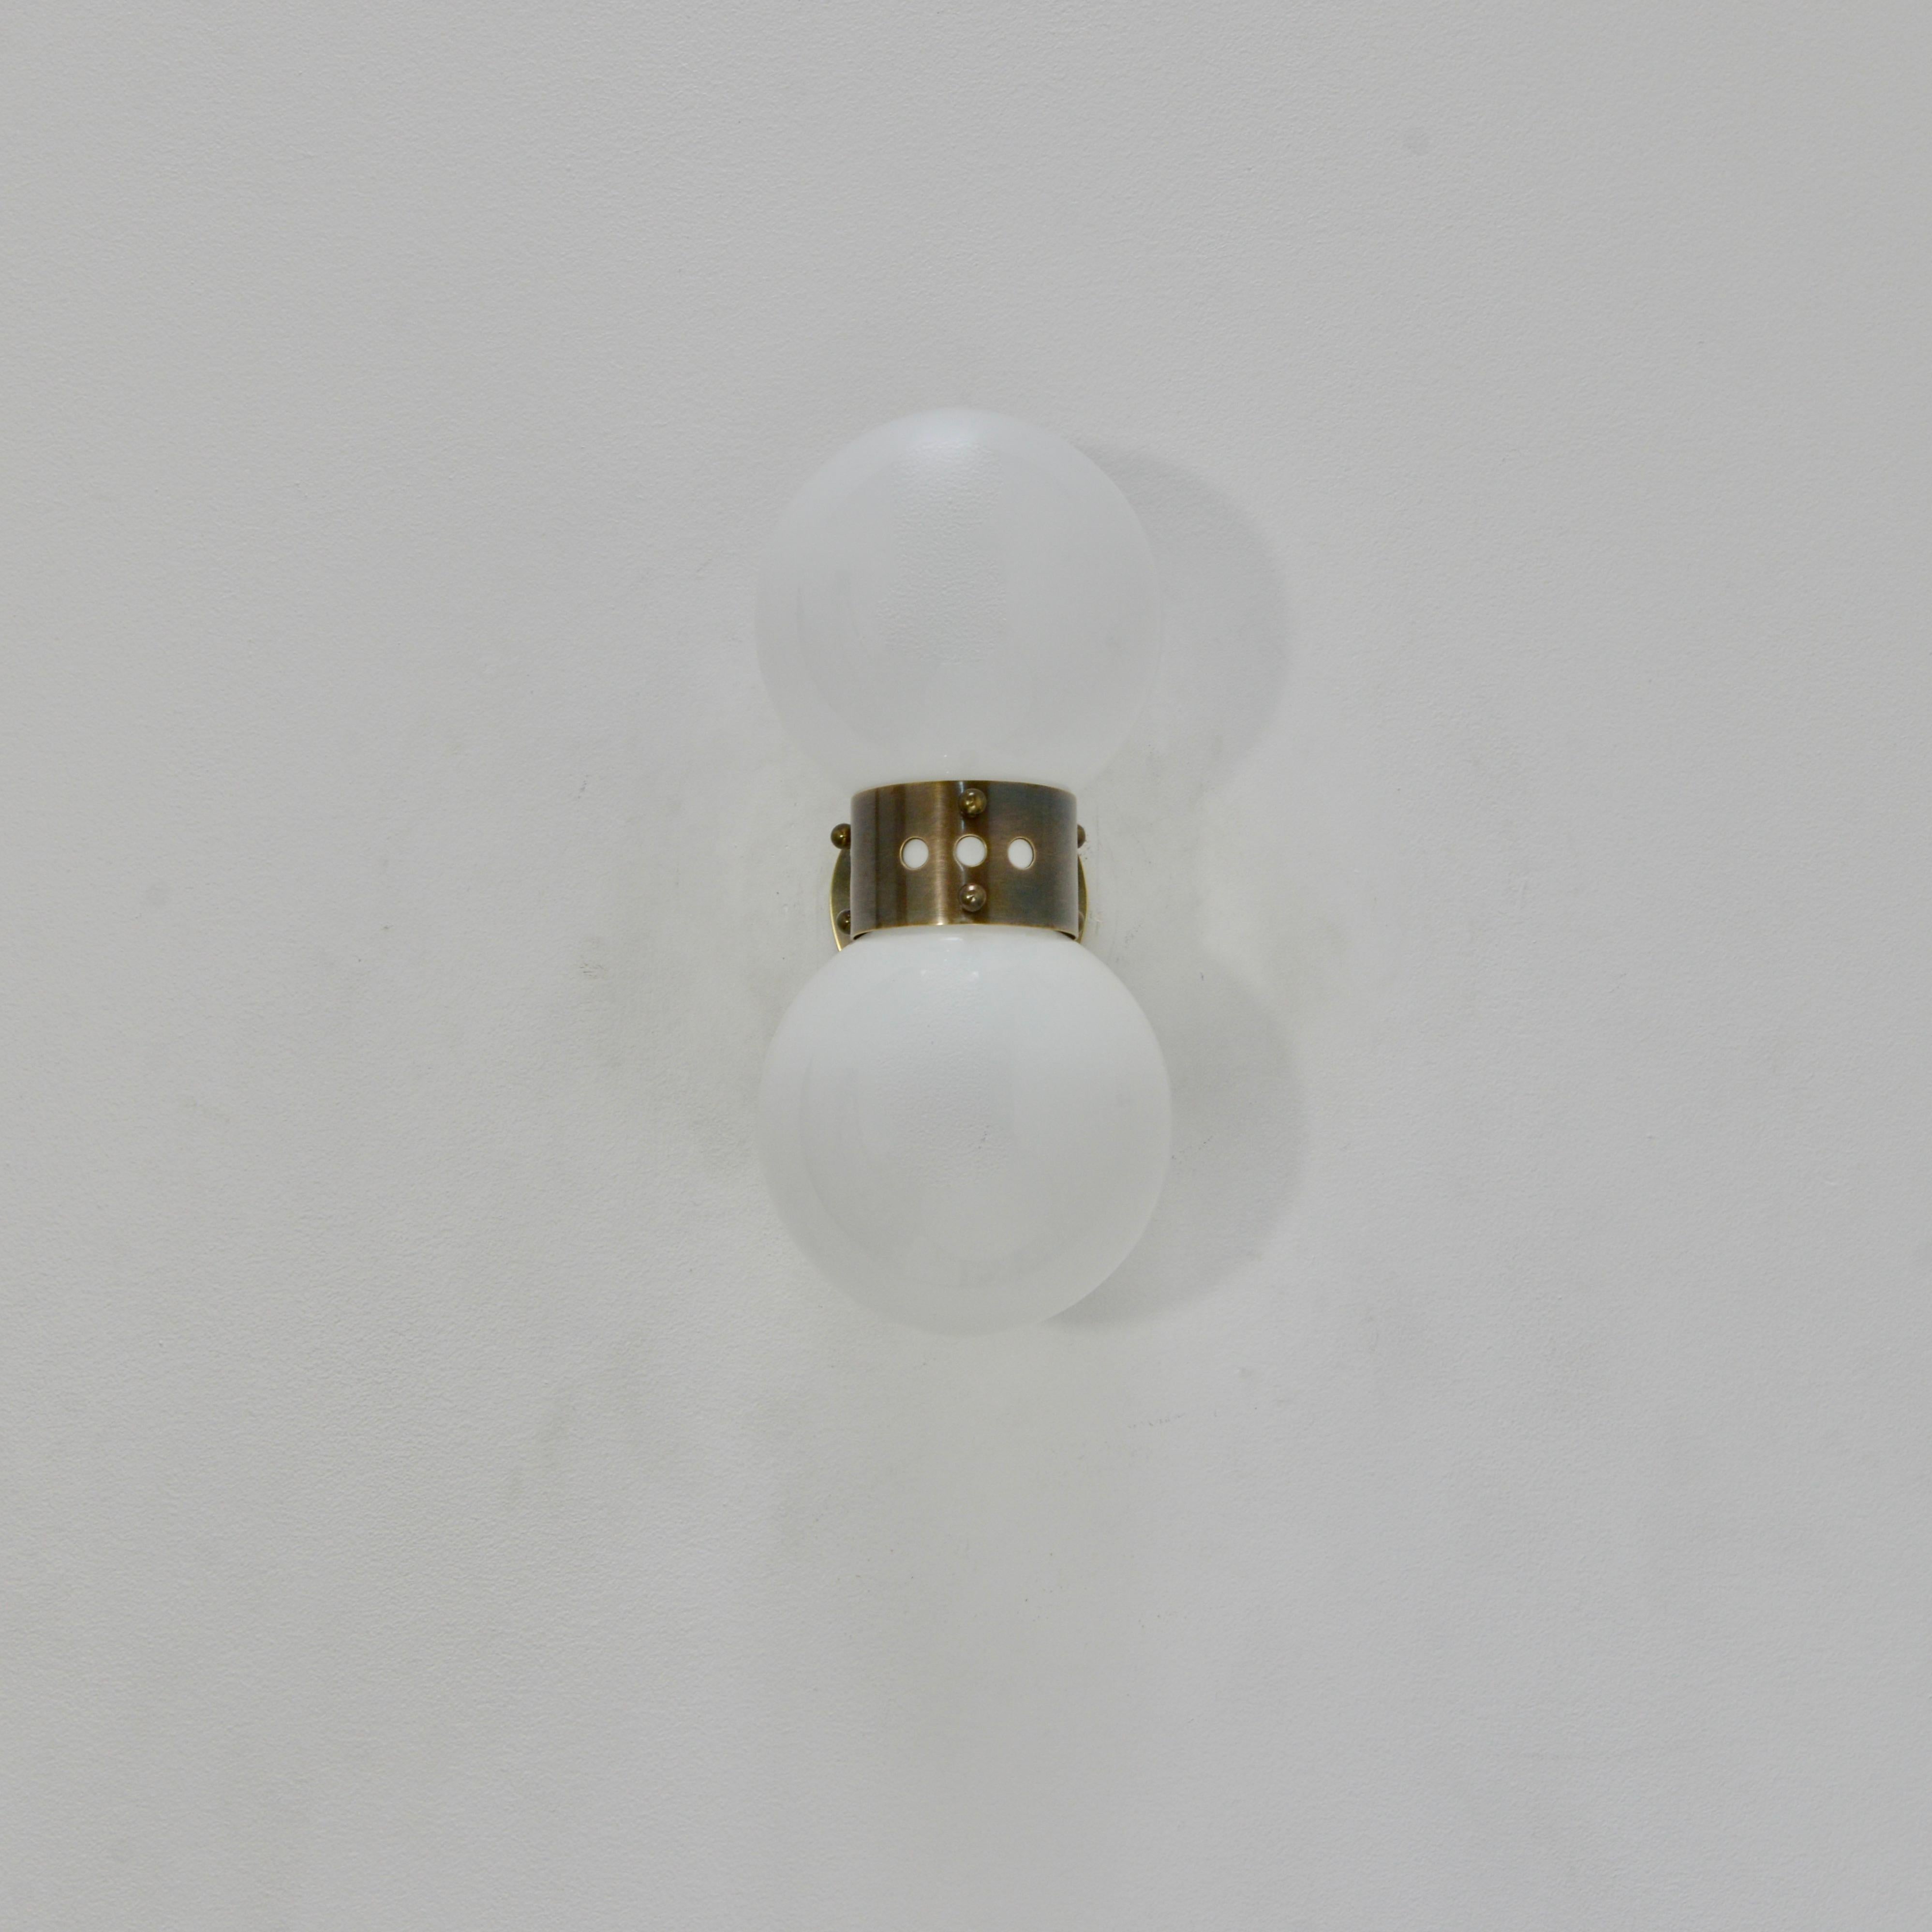 Classic double shaded glass and darkened brass sconces attributed to Mazzega from mid 20th century, Italy. A Classic stunning look with an effective design that feels contemporary. Wired with two E12 candelabra based sockets per sconce, for use in